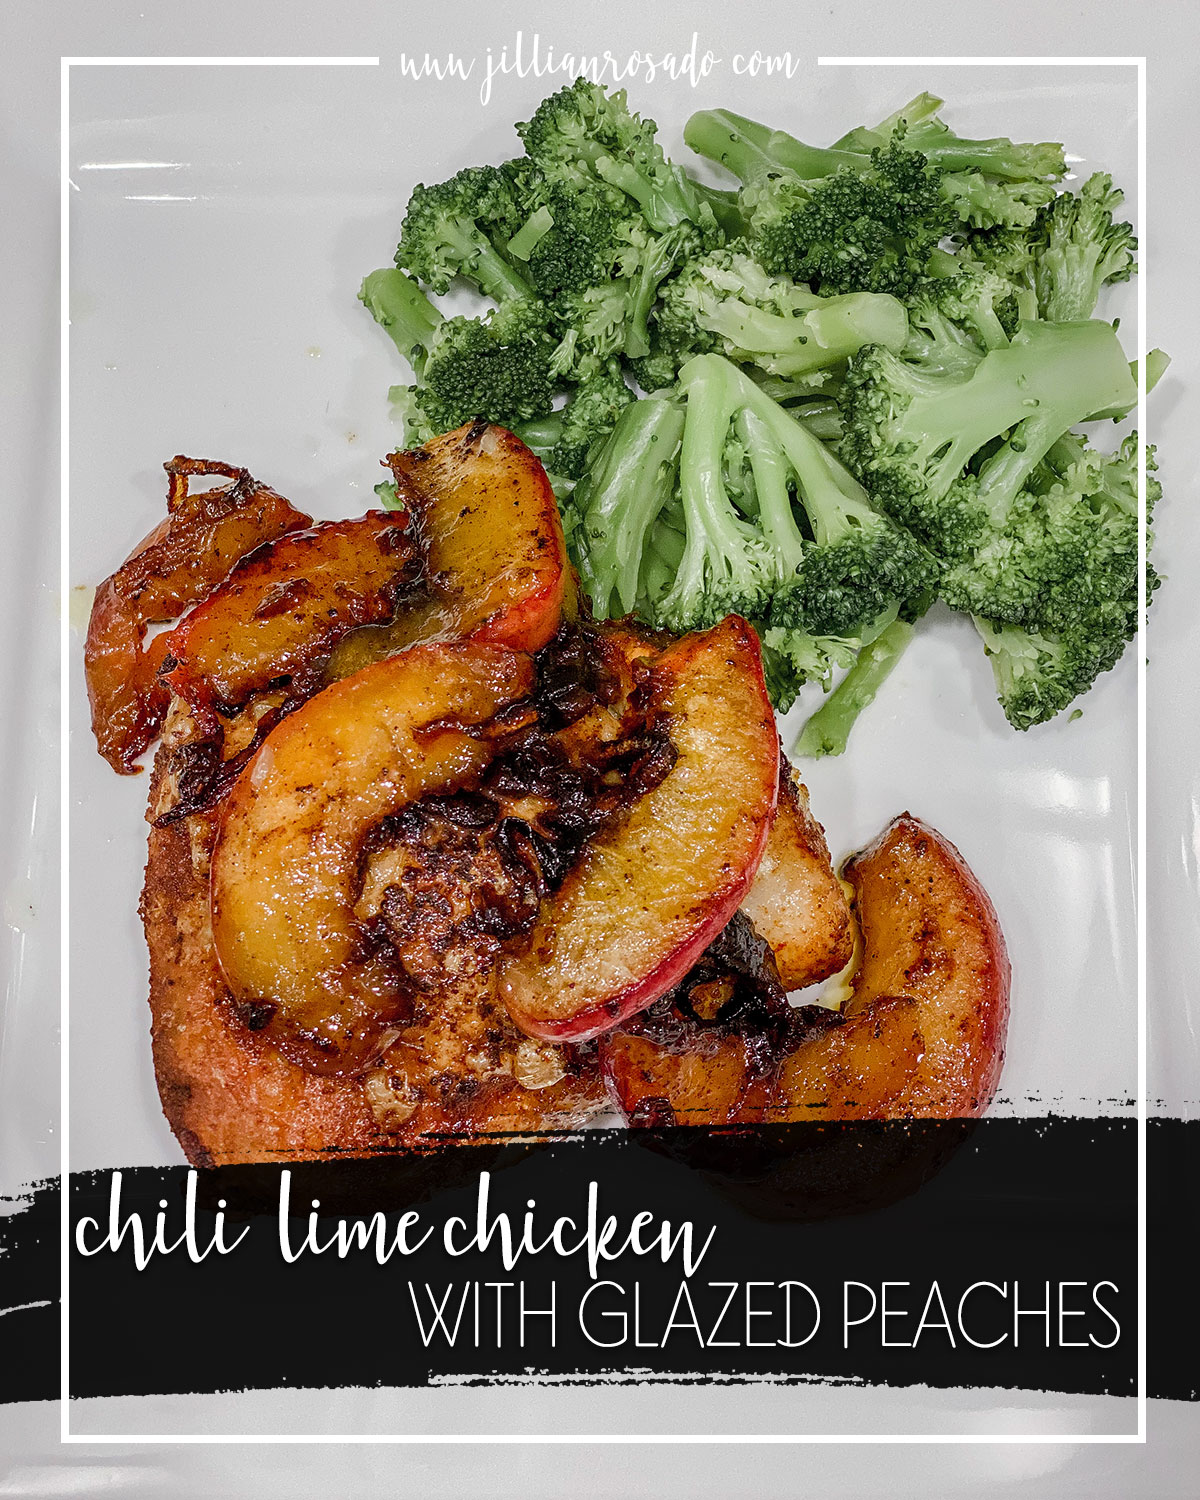 Chili Lime Chicken with Glazed Peaches Recipe